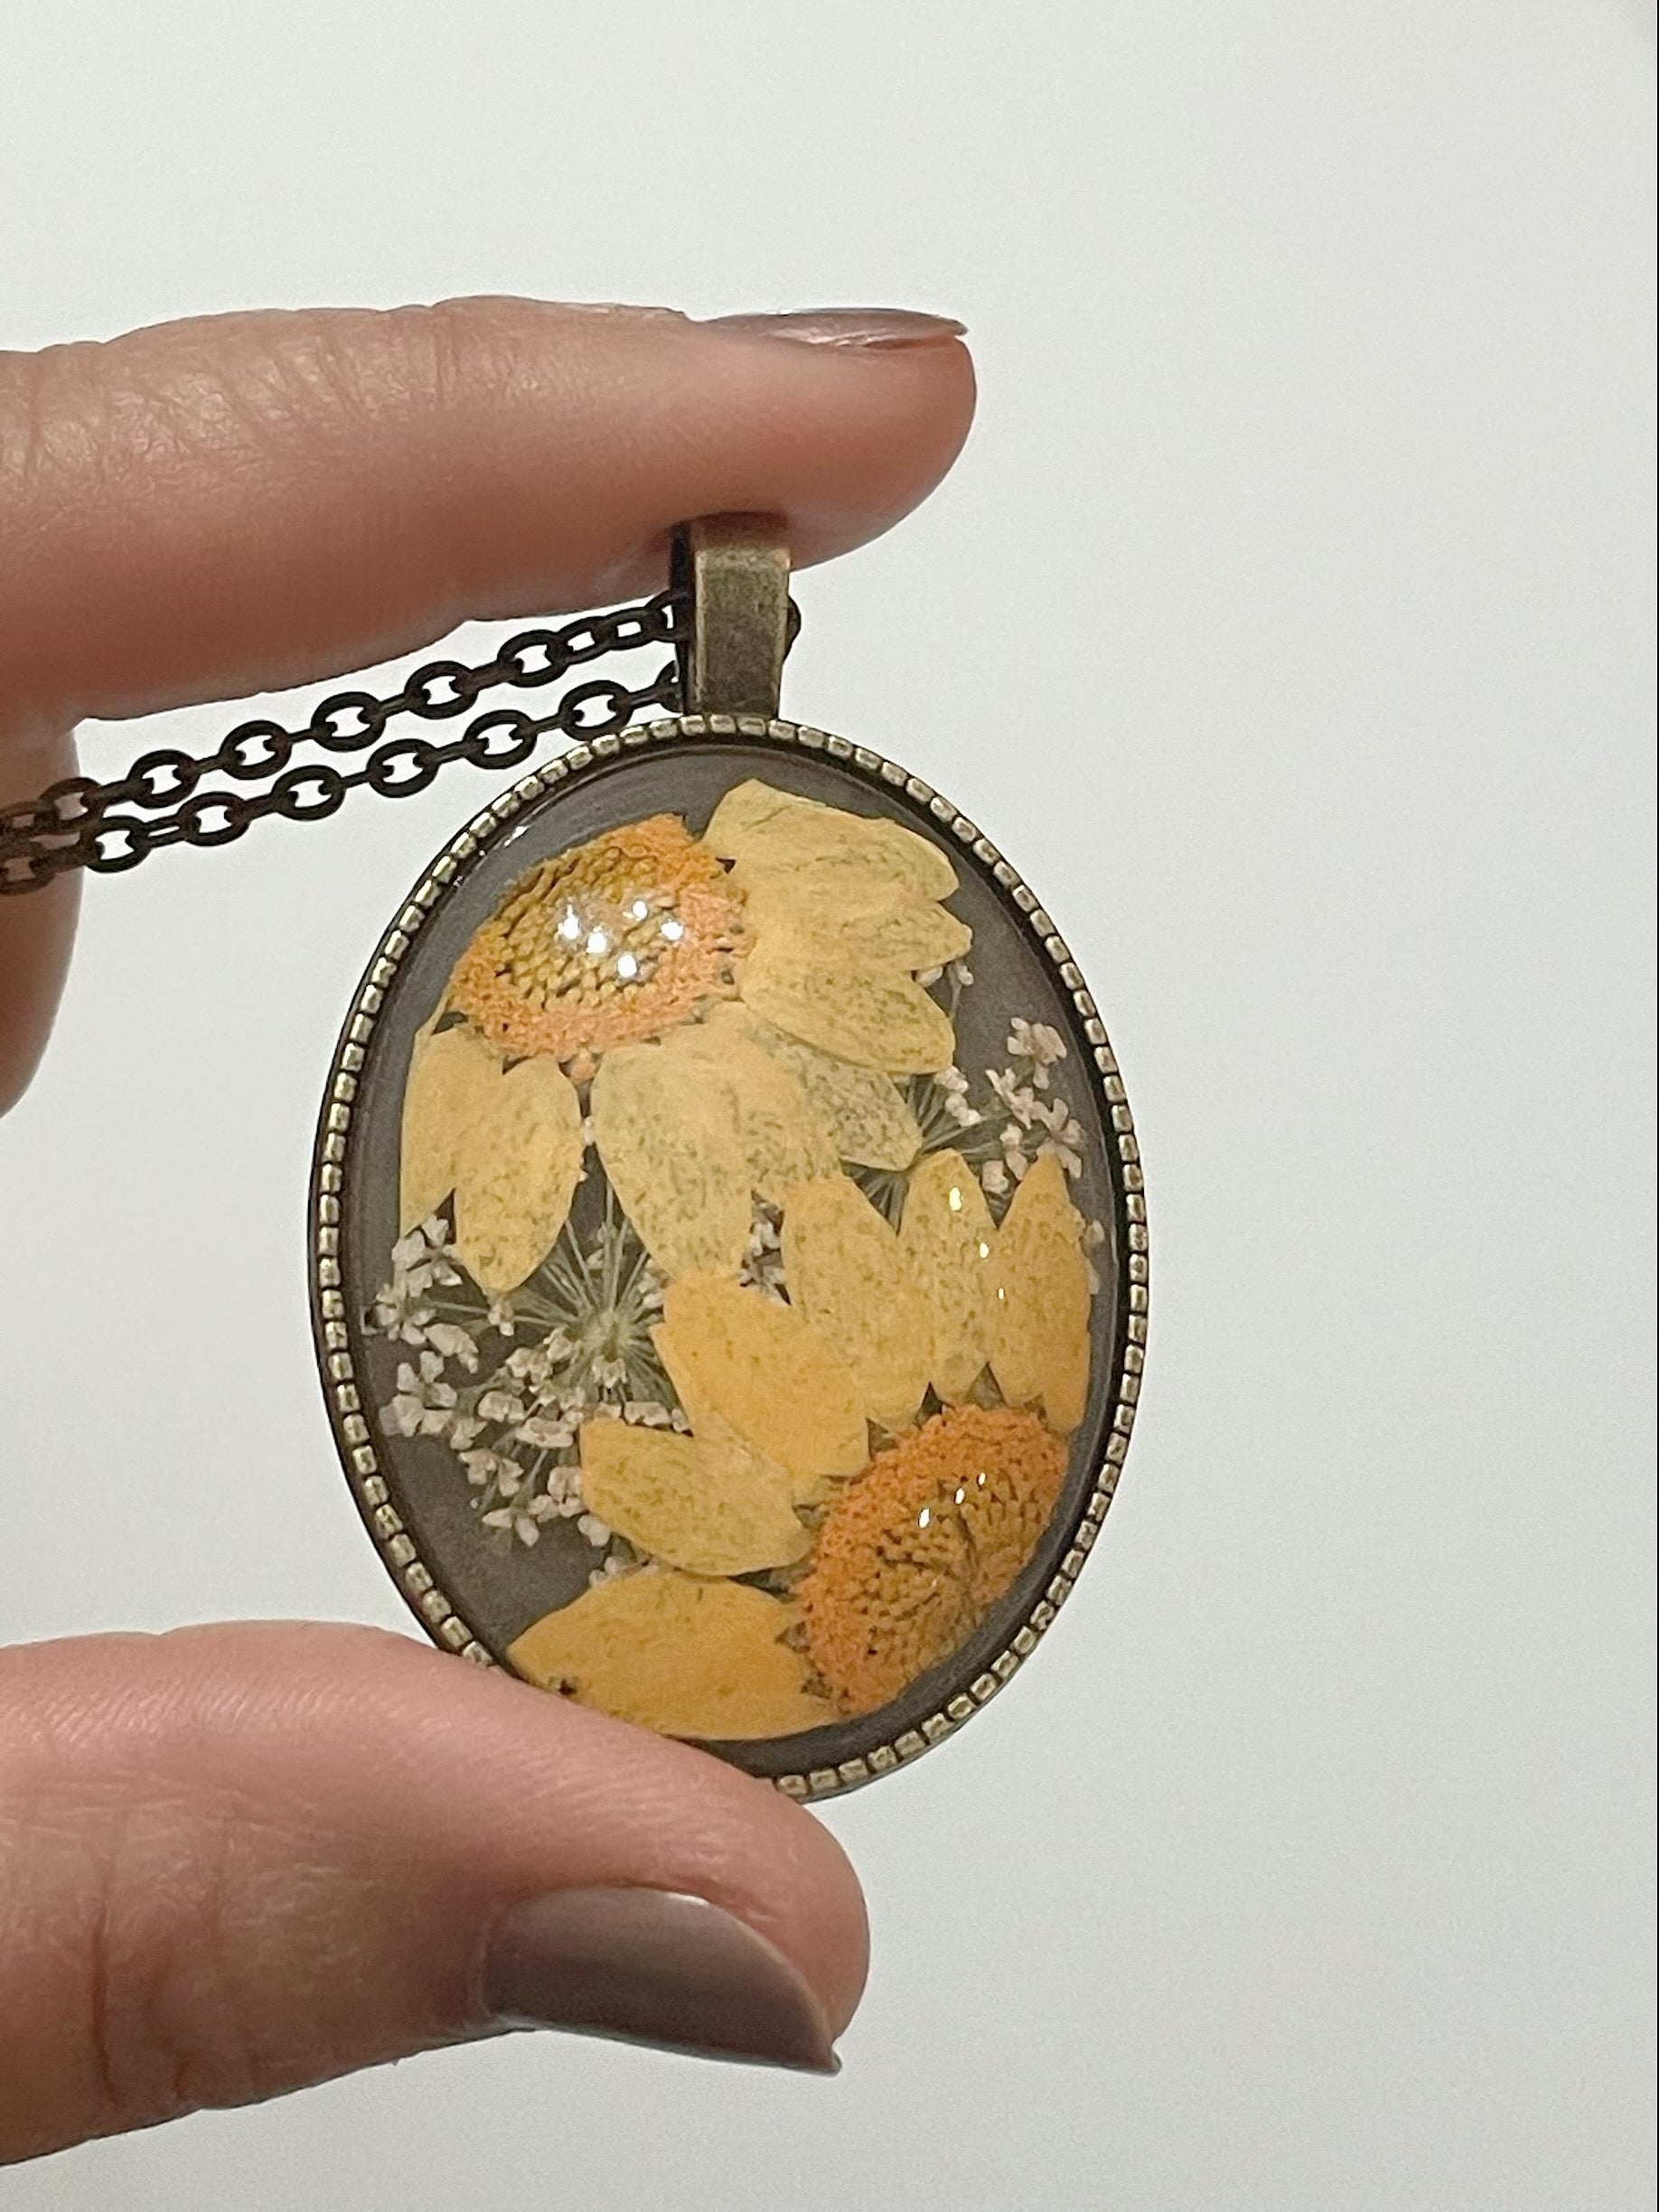 Natural Pressed and Dried Flowers Necklace Encased in Resin